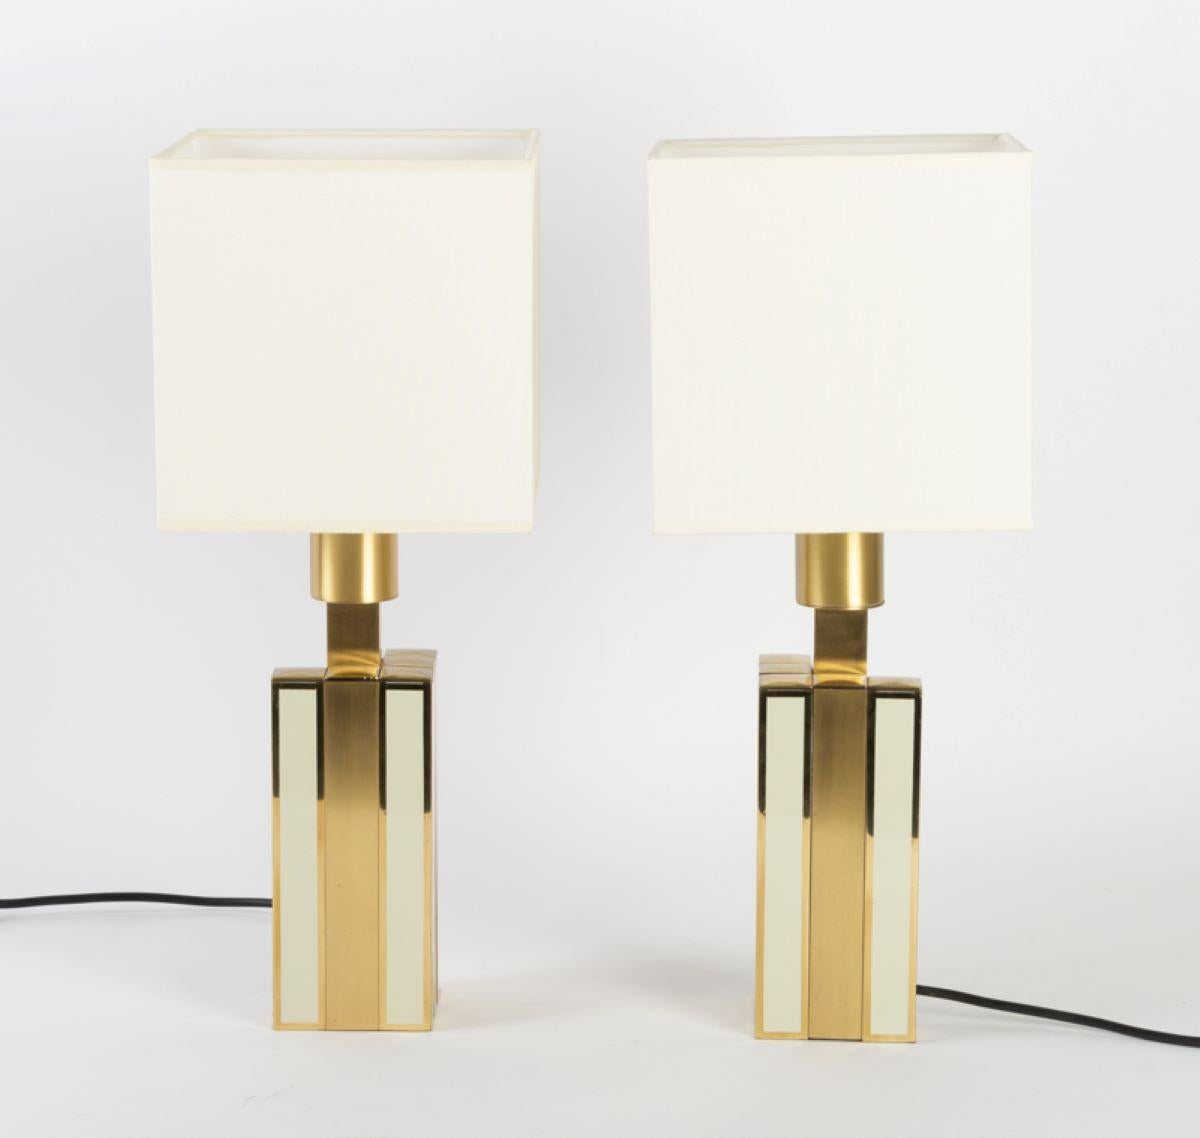 Elegant pair of table lamps, gilded and white lacquered metal, attributed to Romeo Rega, Italy, 1970s
Dimensions of base: H 33 cm, W 9 cm, D 9 cm
Dimensions of shade: H 20 cm, W 20 cm, D 20 cm
Total height with shades 50 cm.